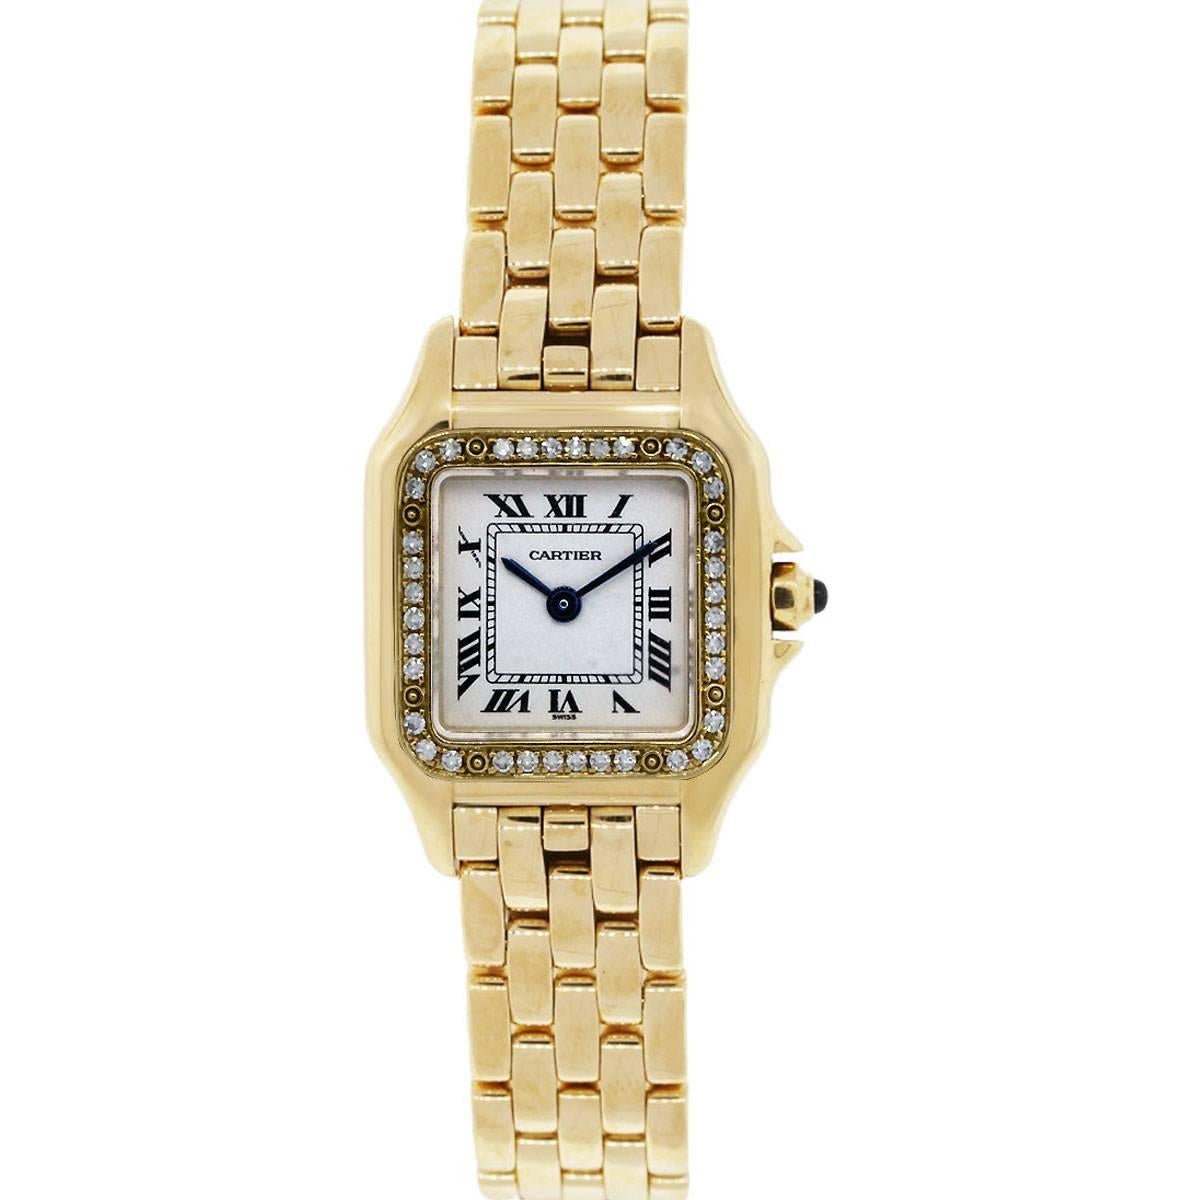 Brand: Cartier
Style: Panthere 1280
Case Material: 18k Yellow Gold
Case Diameter: 22mm
Bezel: Factory original diamond bezel, diamonds are G in color and VS in clarity.
Dial: White Dial with Roman Numeral Dial Markers, Index Blue